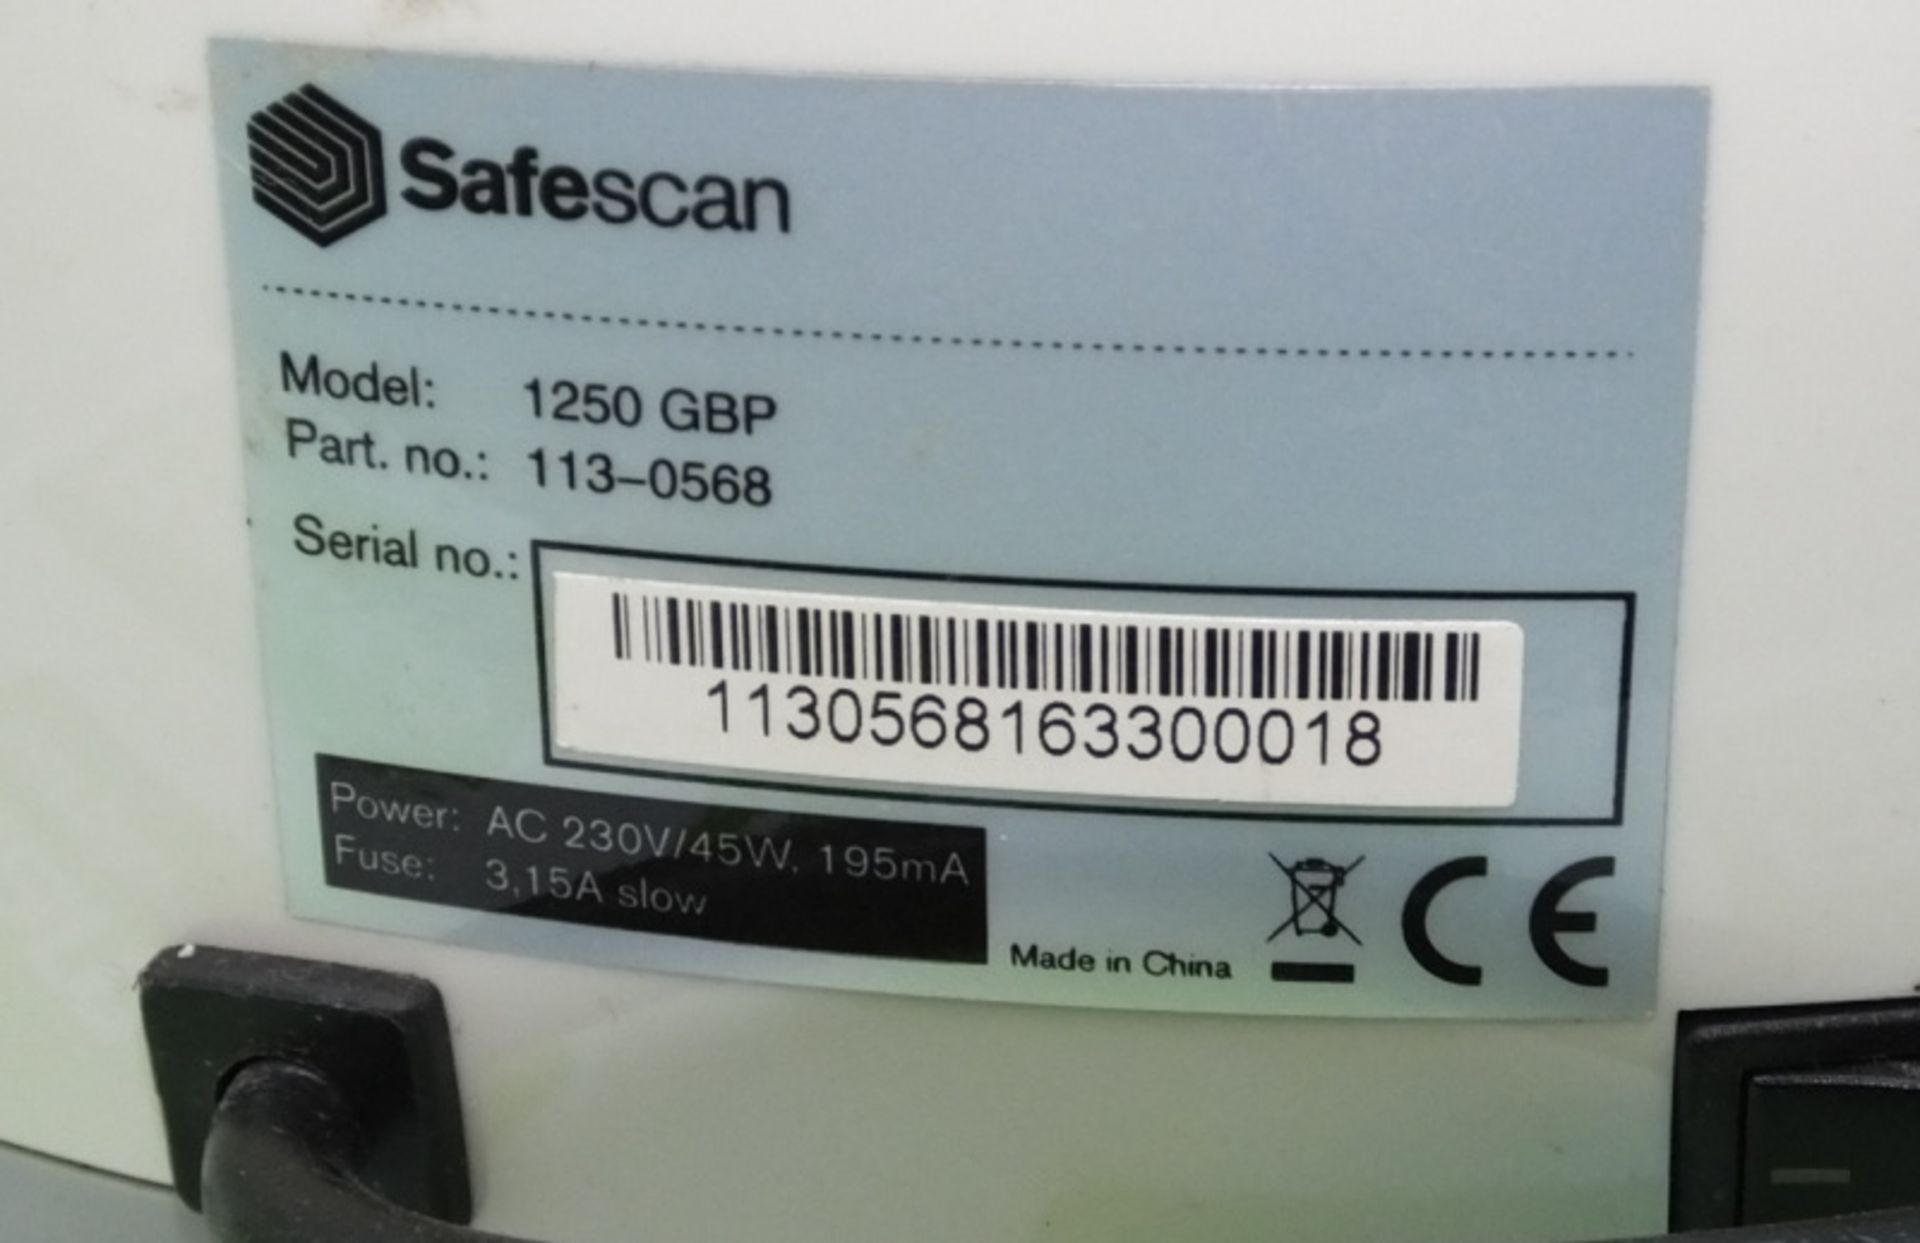 Safescan 1250 GBP Money Counter - Image 5 of 5